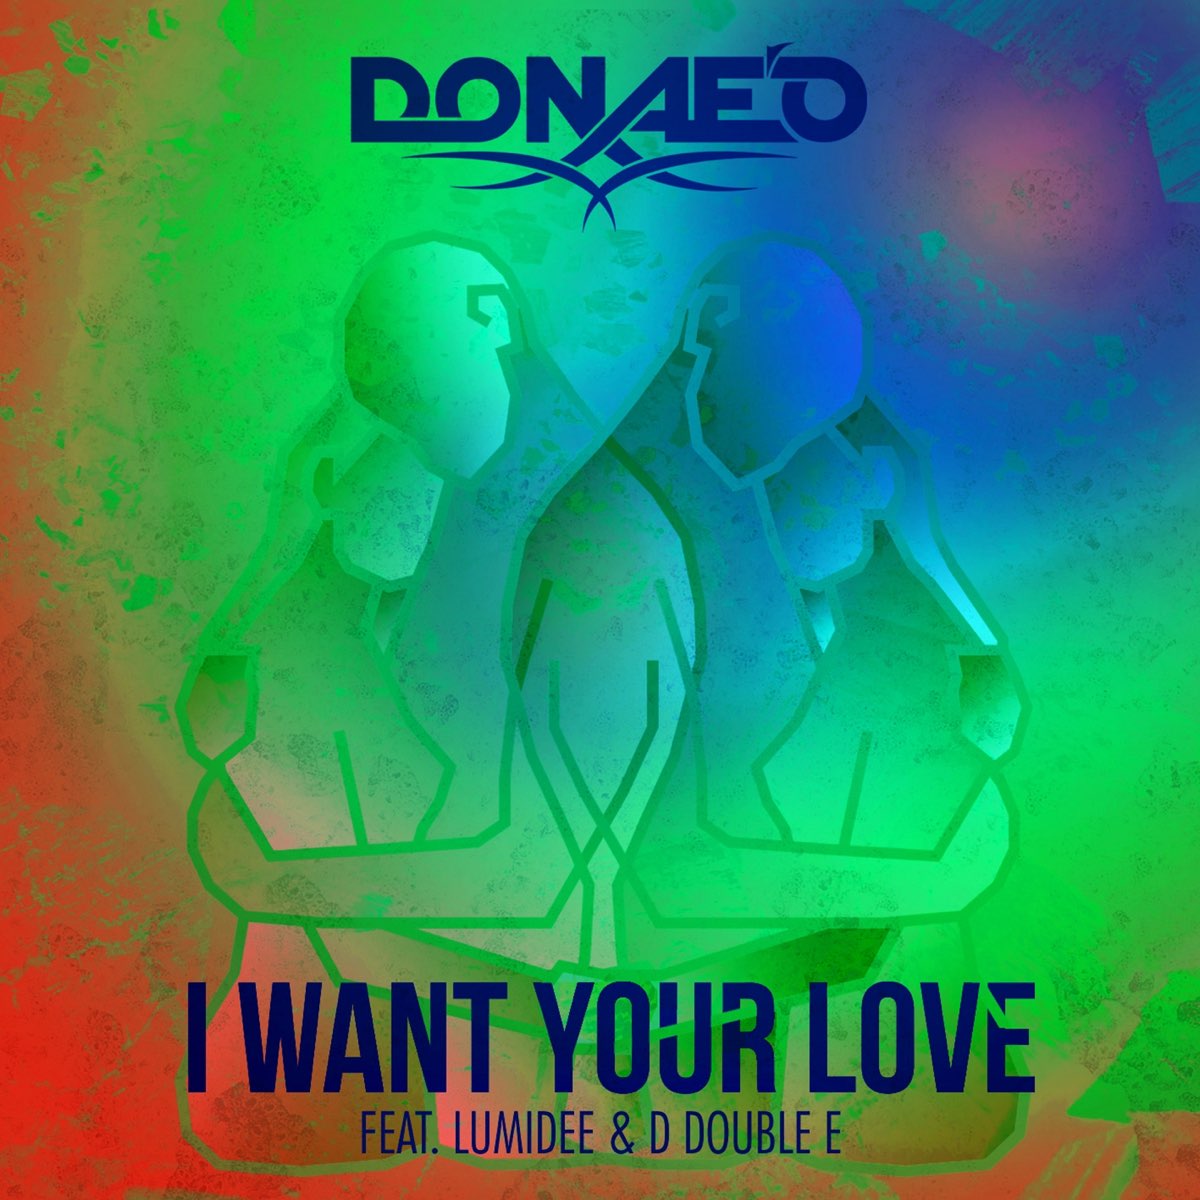 In and out of love remix. Want your Love. I want your Love. Топ i want your Love.